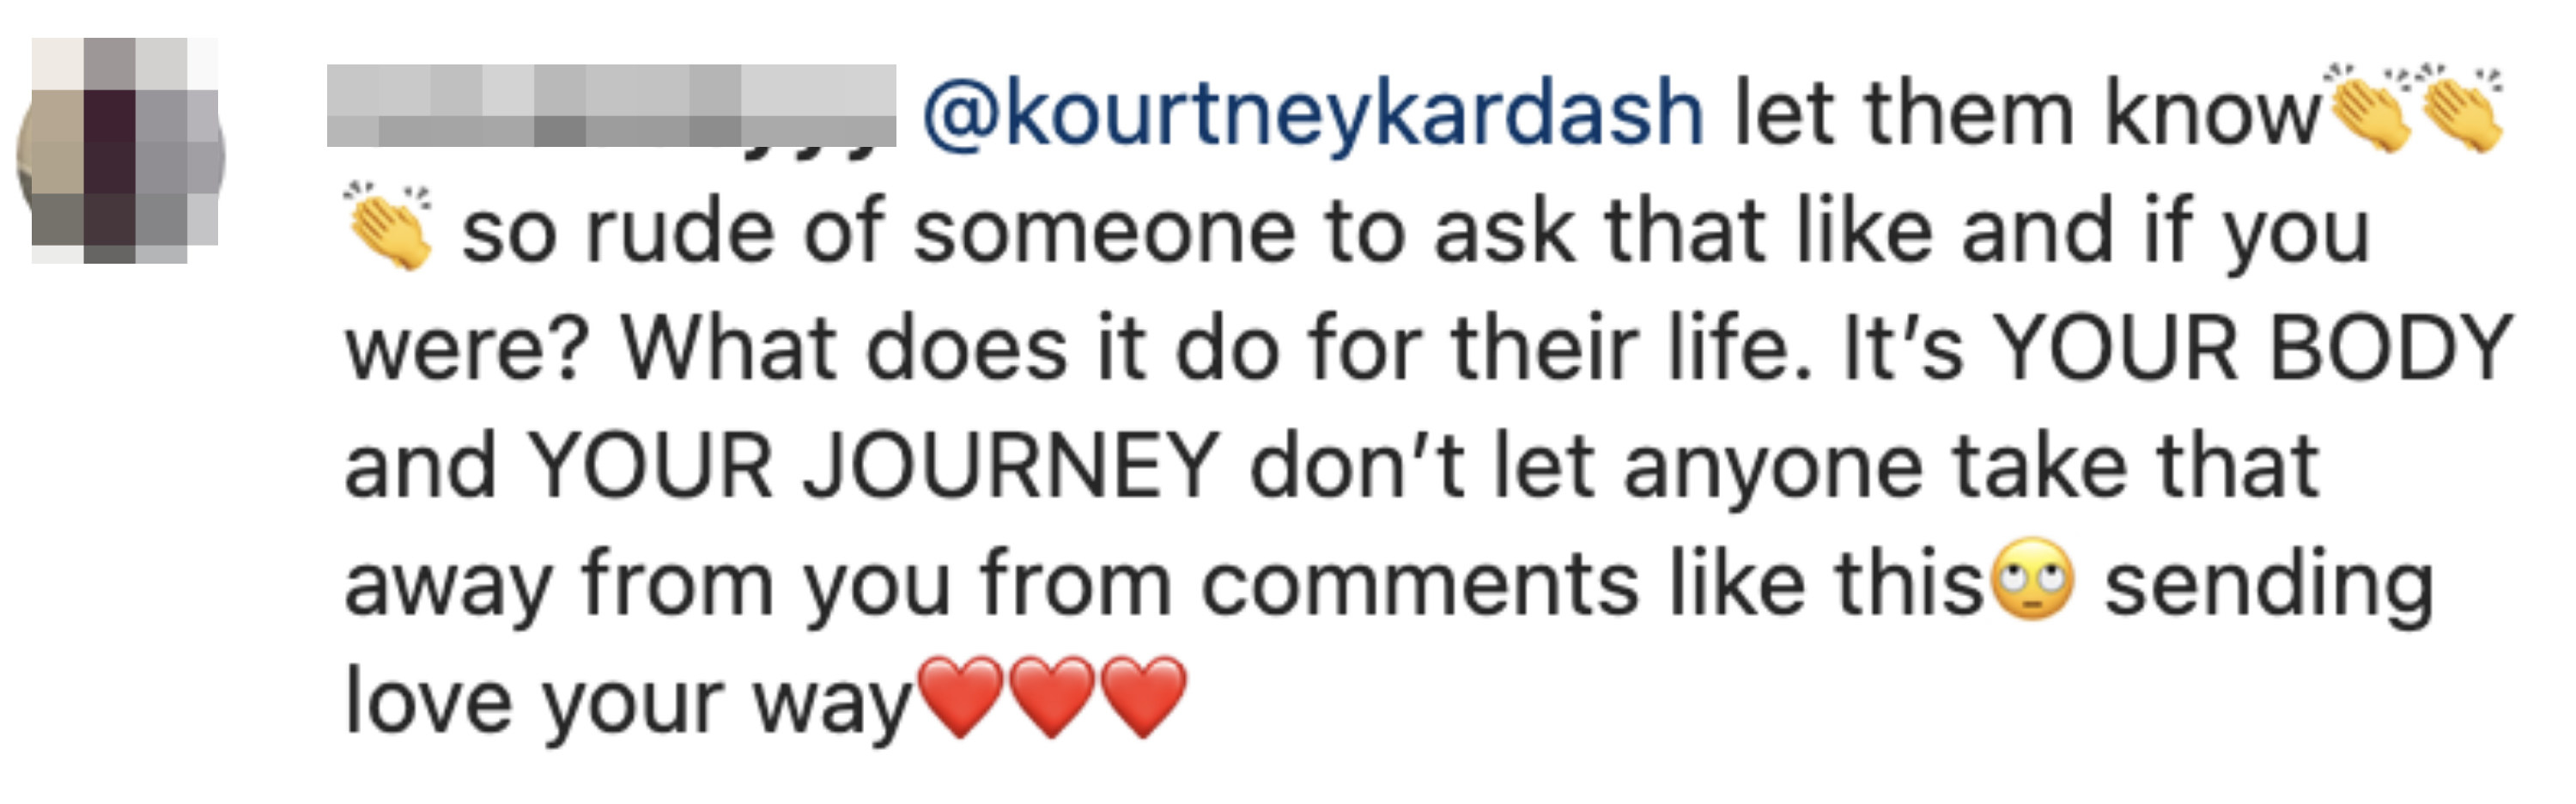 Comment with clapping emojis and saying to Kourtney, &quot;so rude of someone to ask that&quot; and &quot;it&#x27;s YOUR BODY and YOUR JOURNEY don&#x27;t let anyone take that away from you&quot;